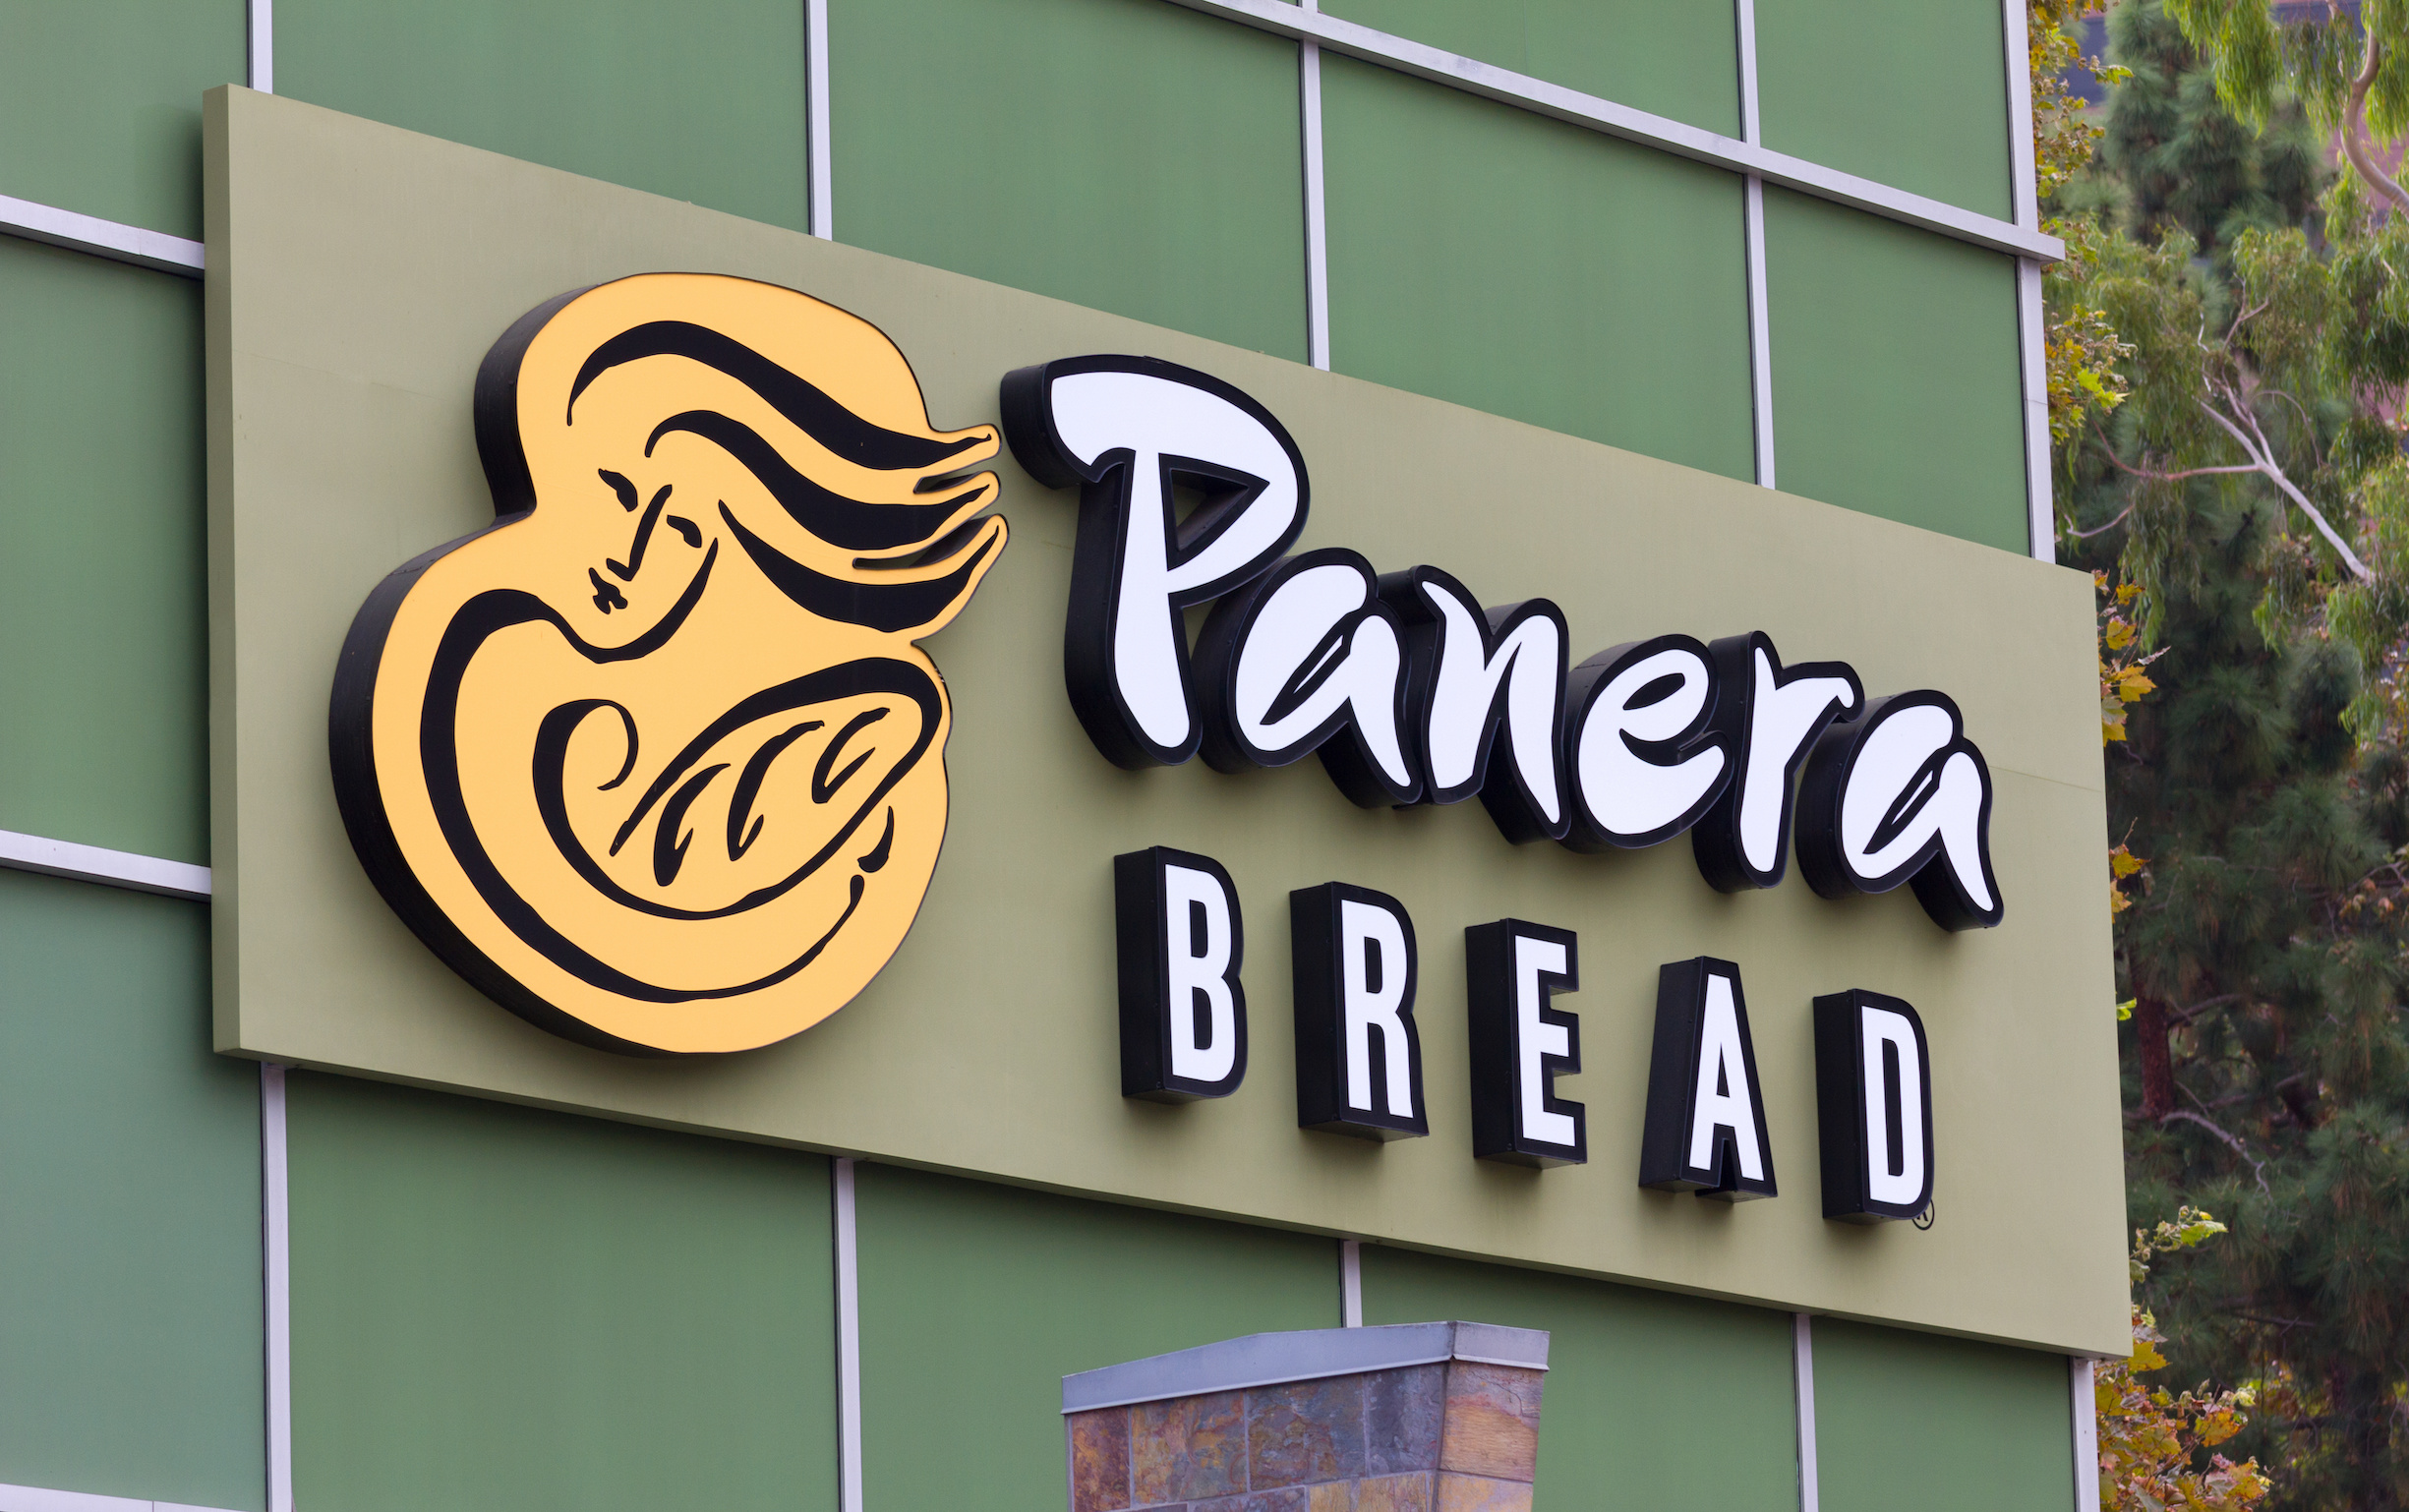 Panera Charged Lemonade Lawsuits: Do They Have a Case?